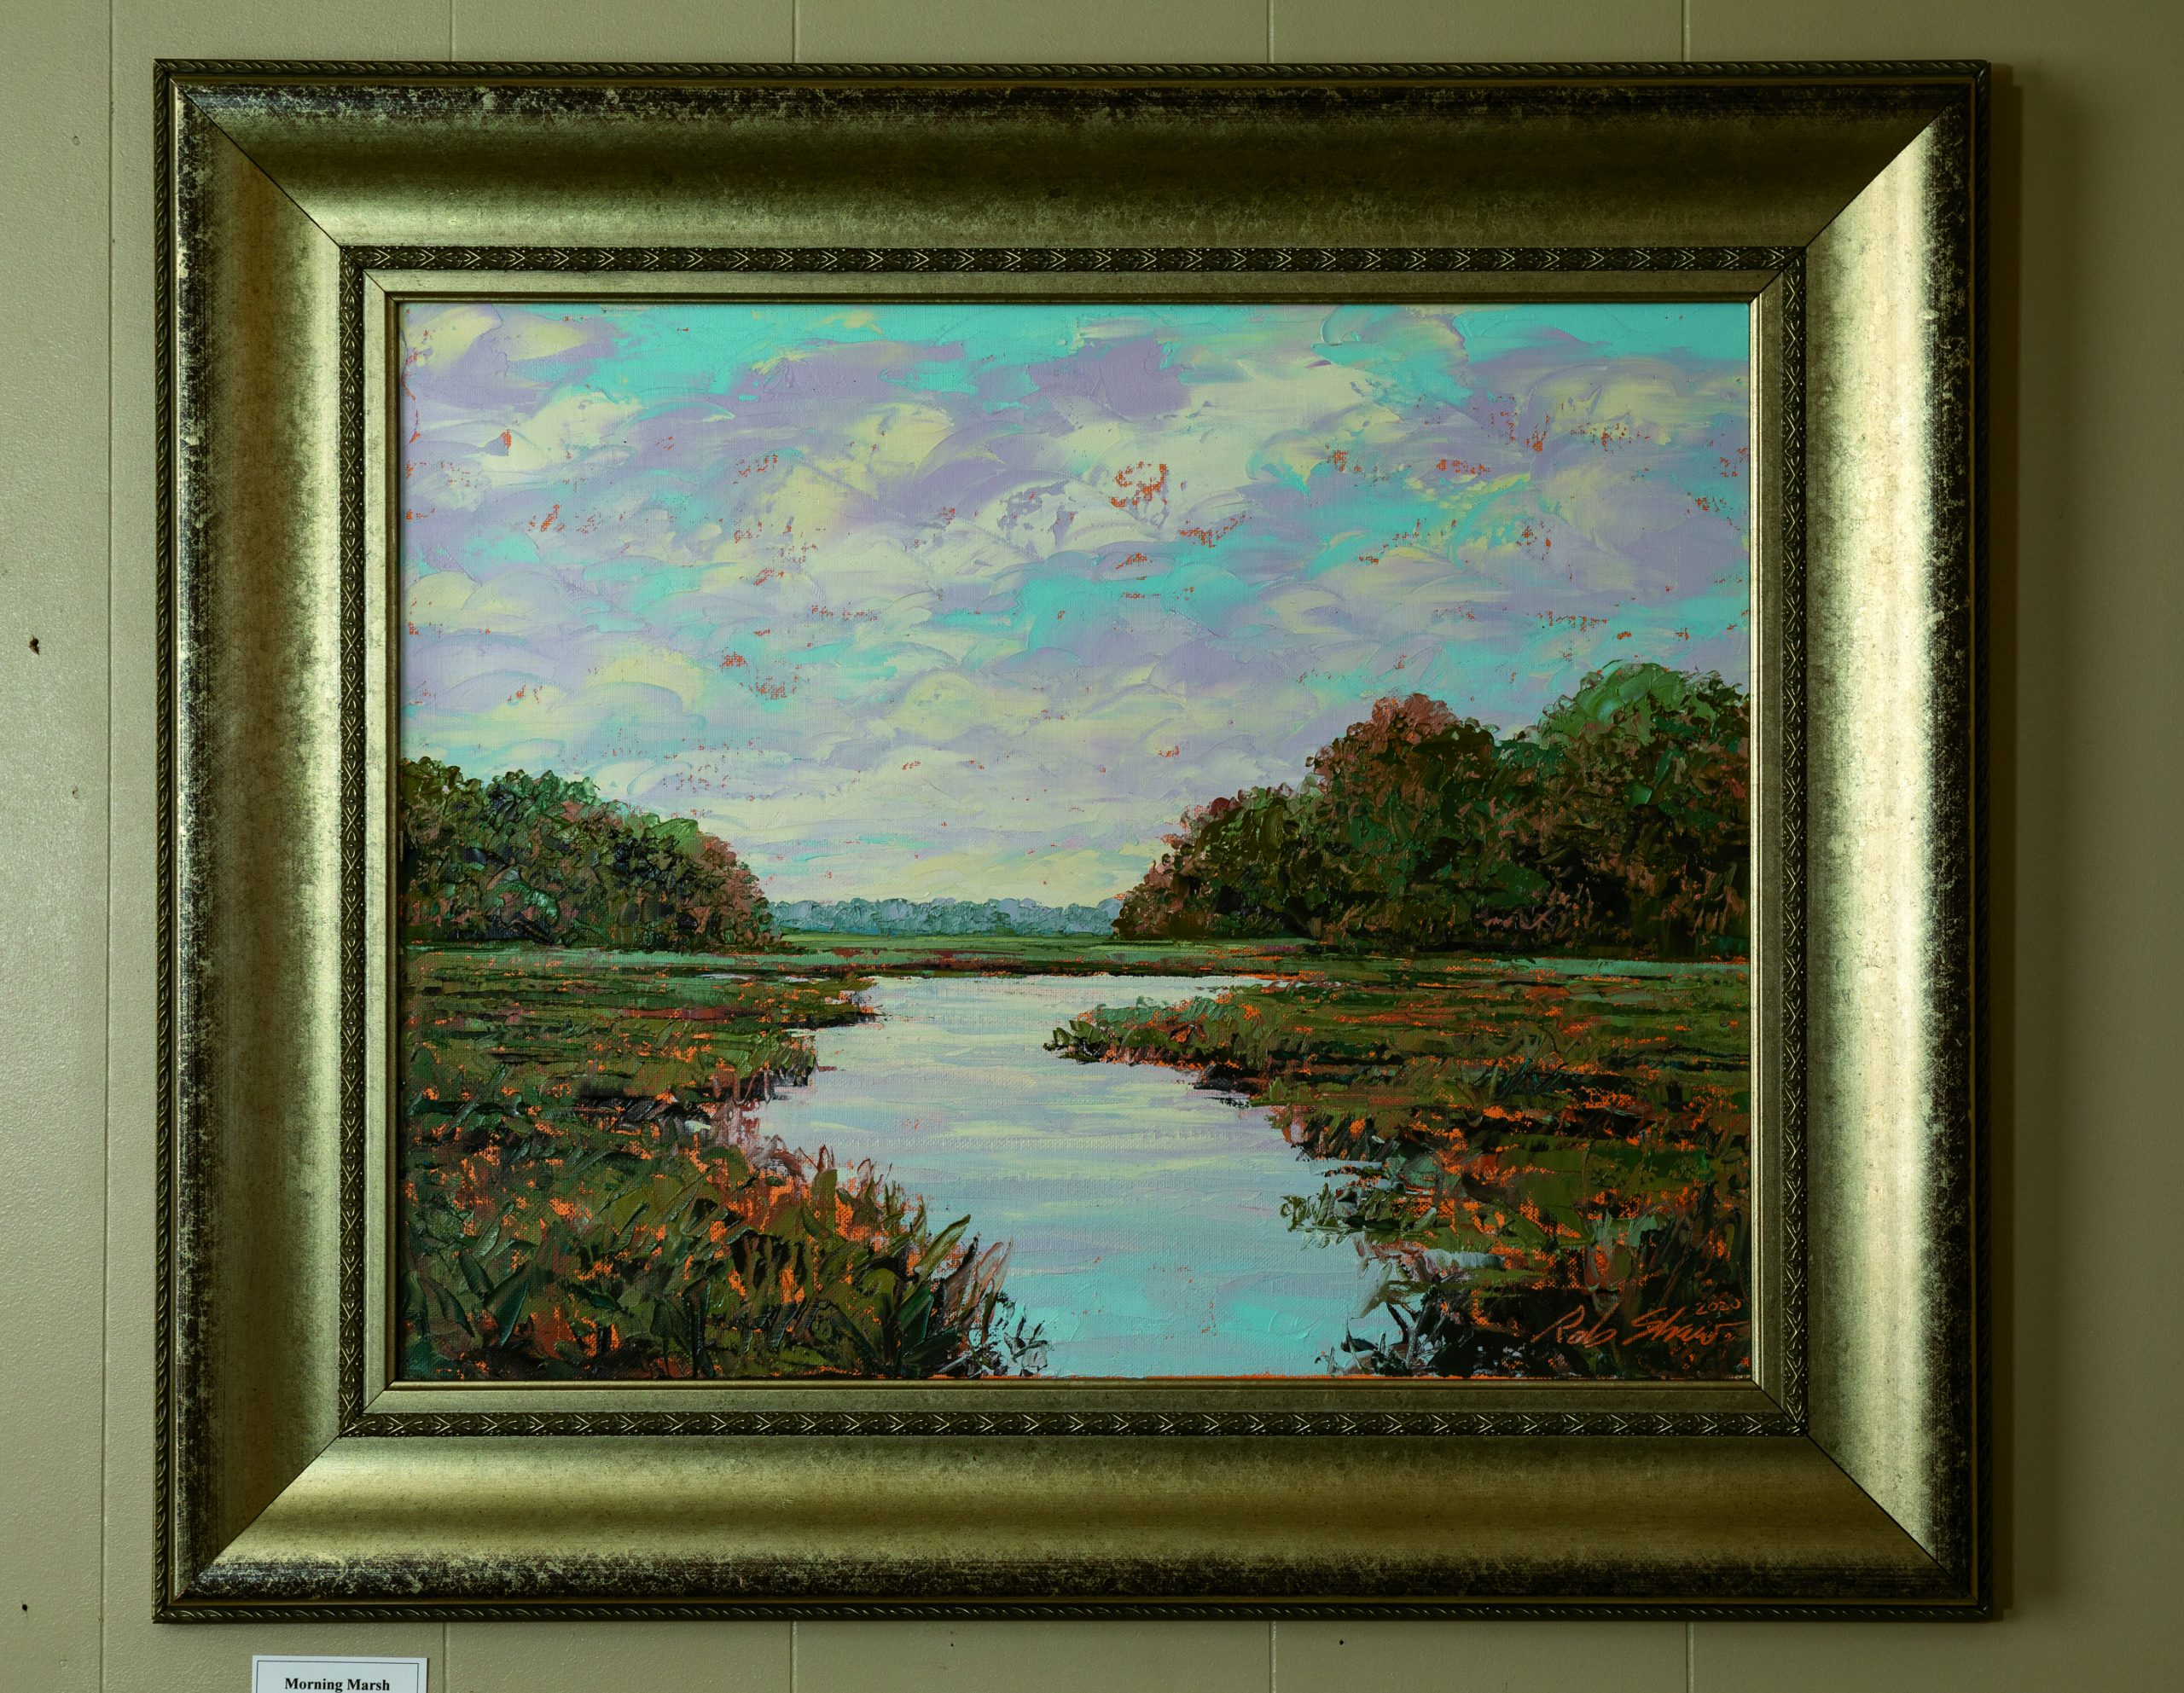 Rob Shaw painted Morning Marsh in 2020 while visiting Harbor Island, near Beaufort. The morning light in the Lowcountry was his inspiration for this oil on canvas.